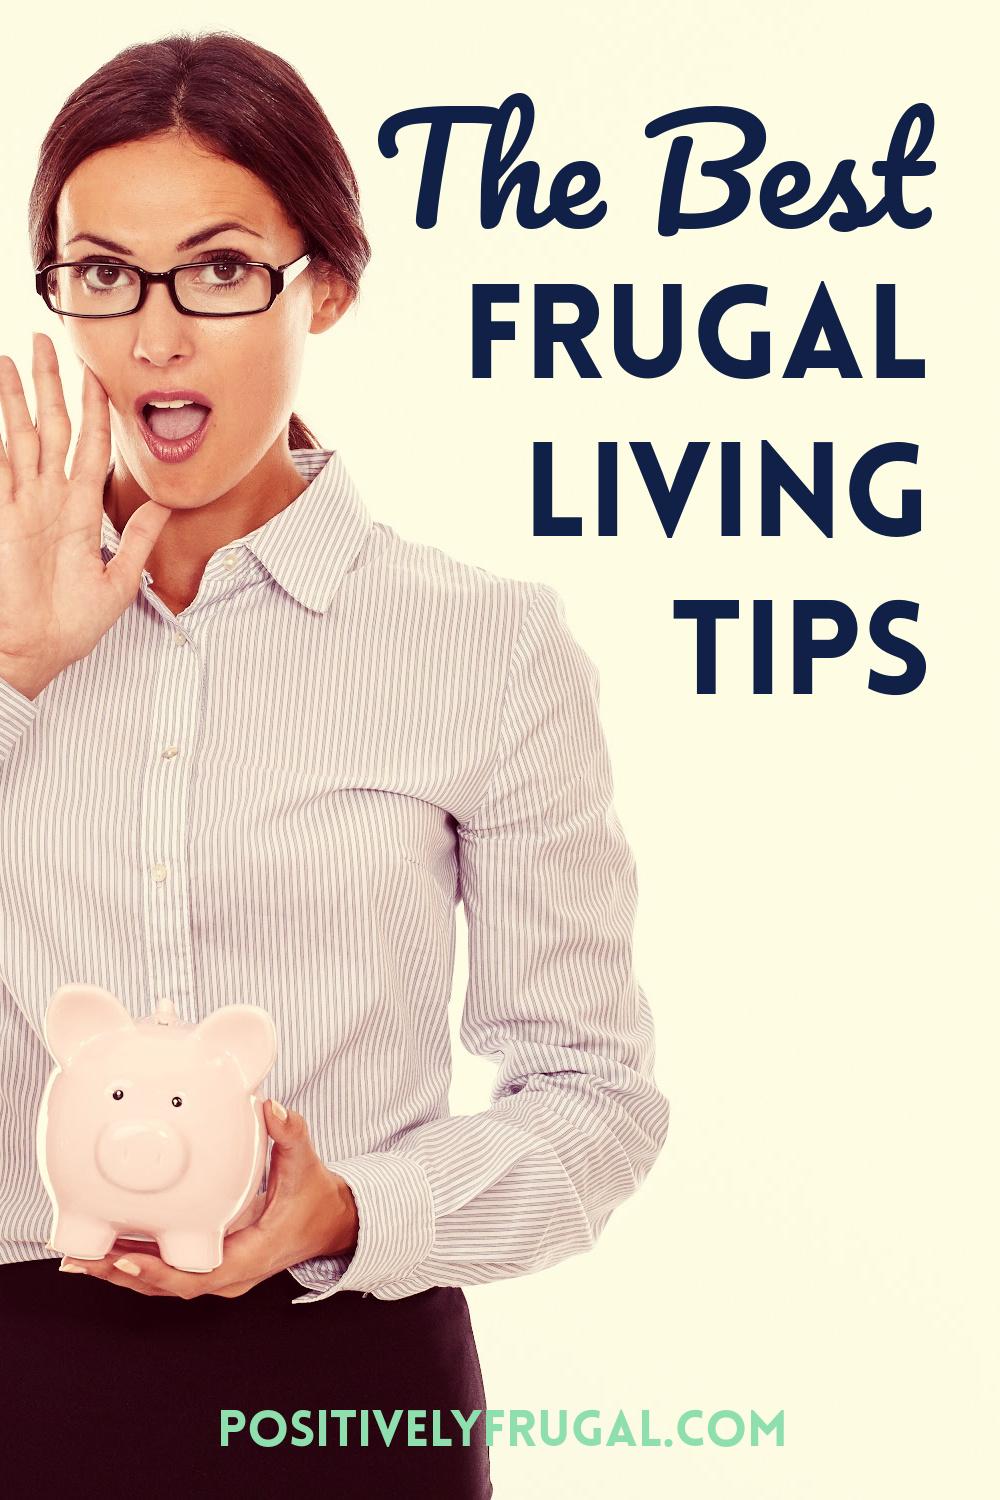 The Best Frugal Living Tips by PositivelyFrugal.com